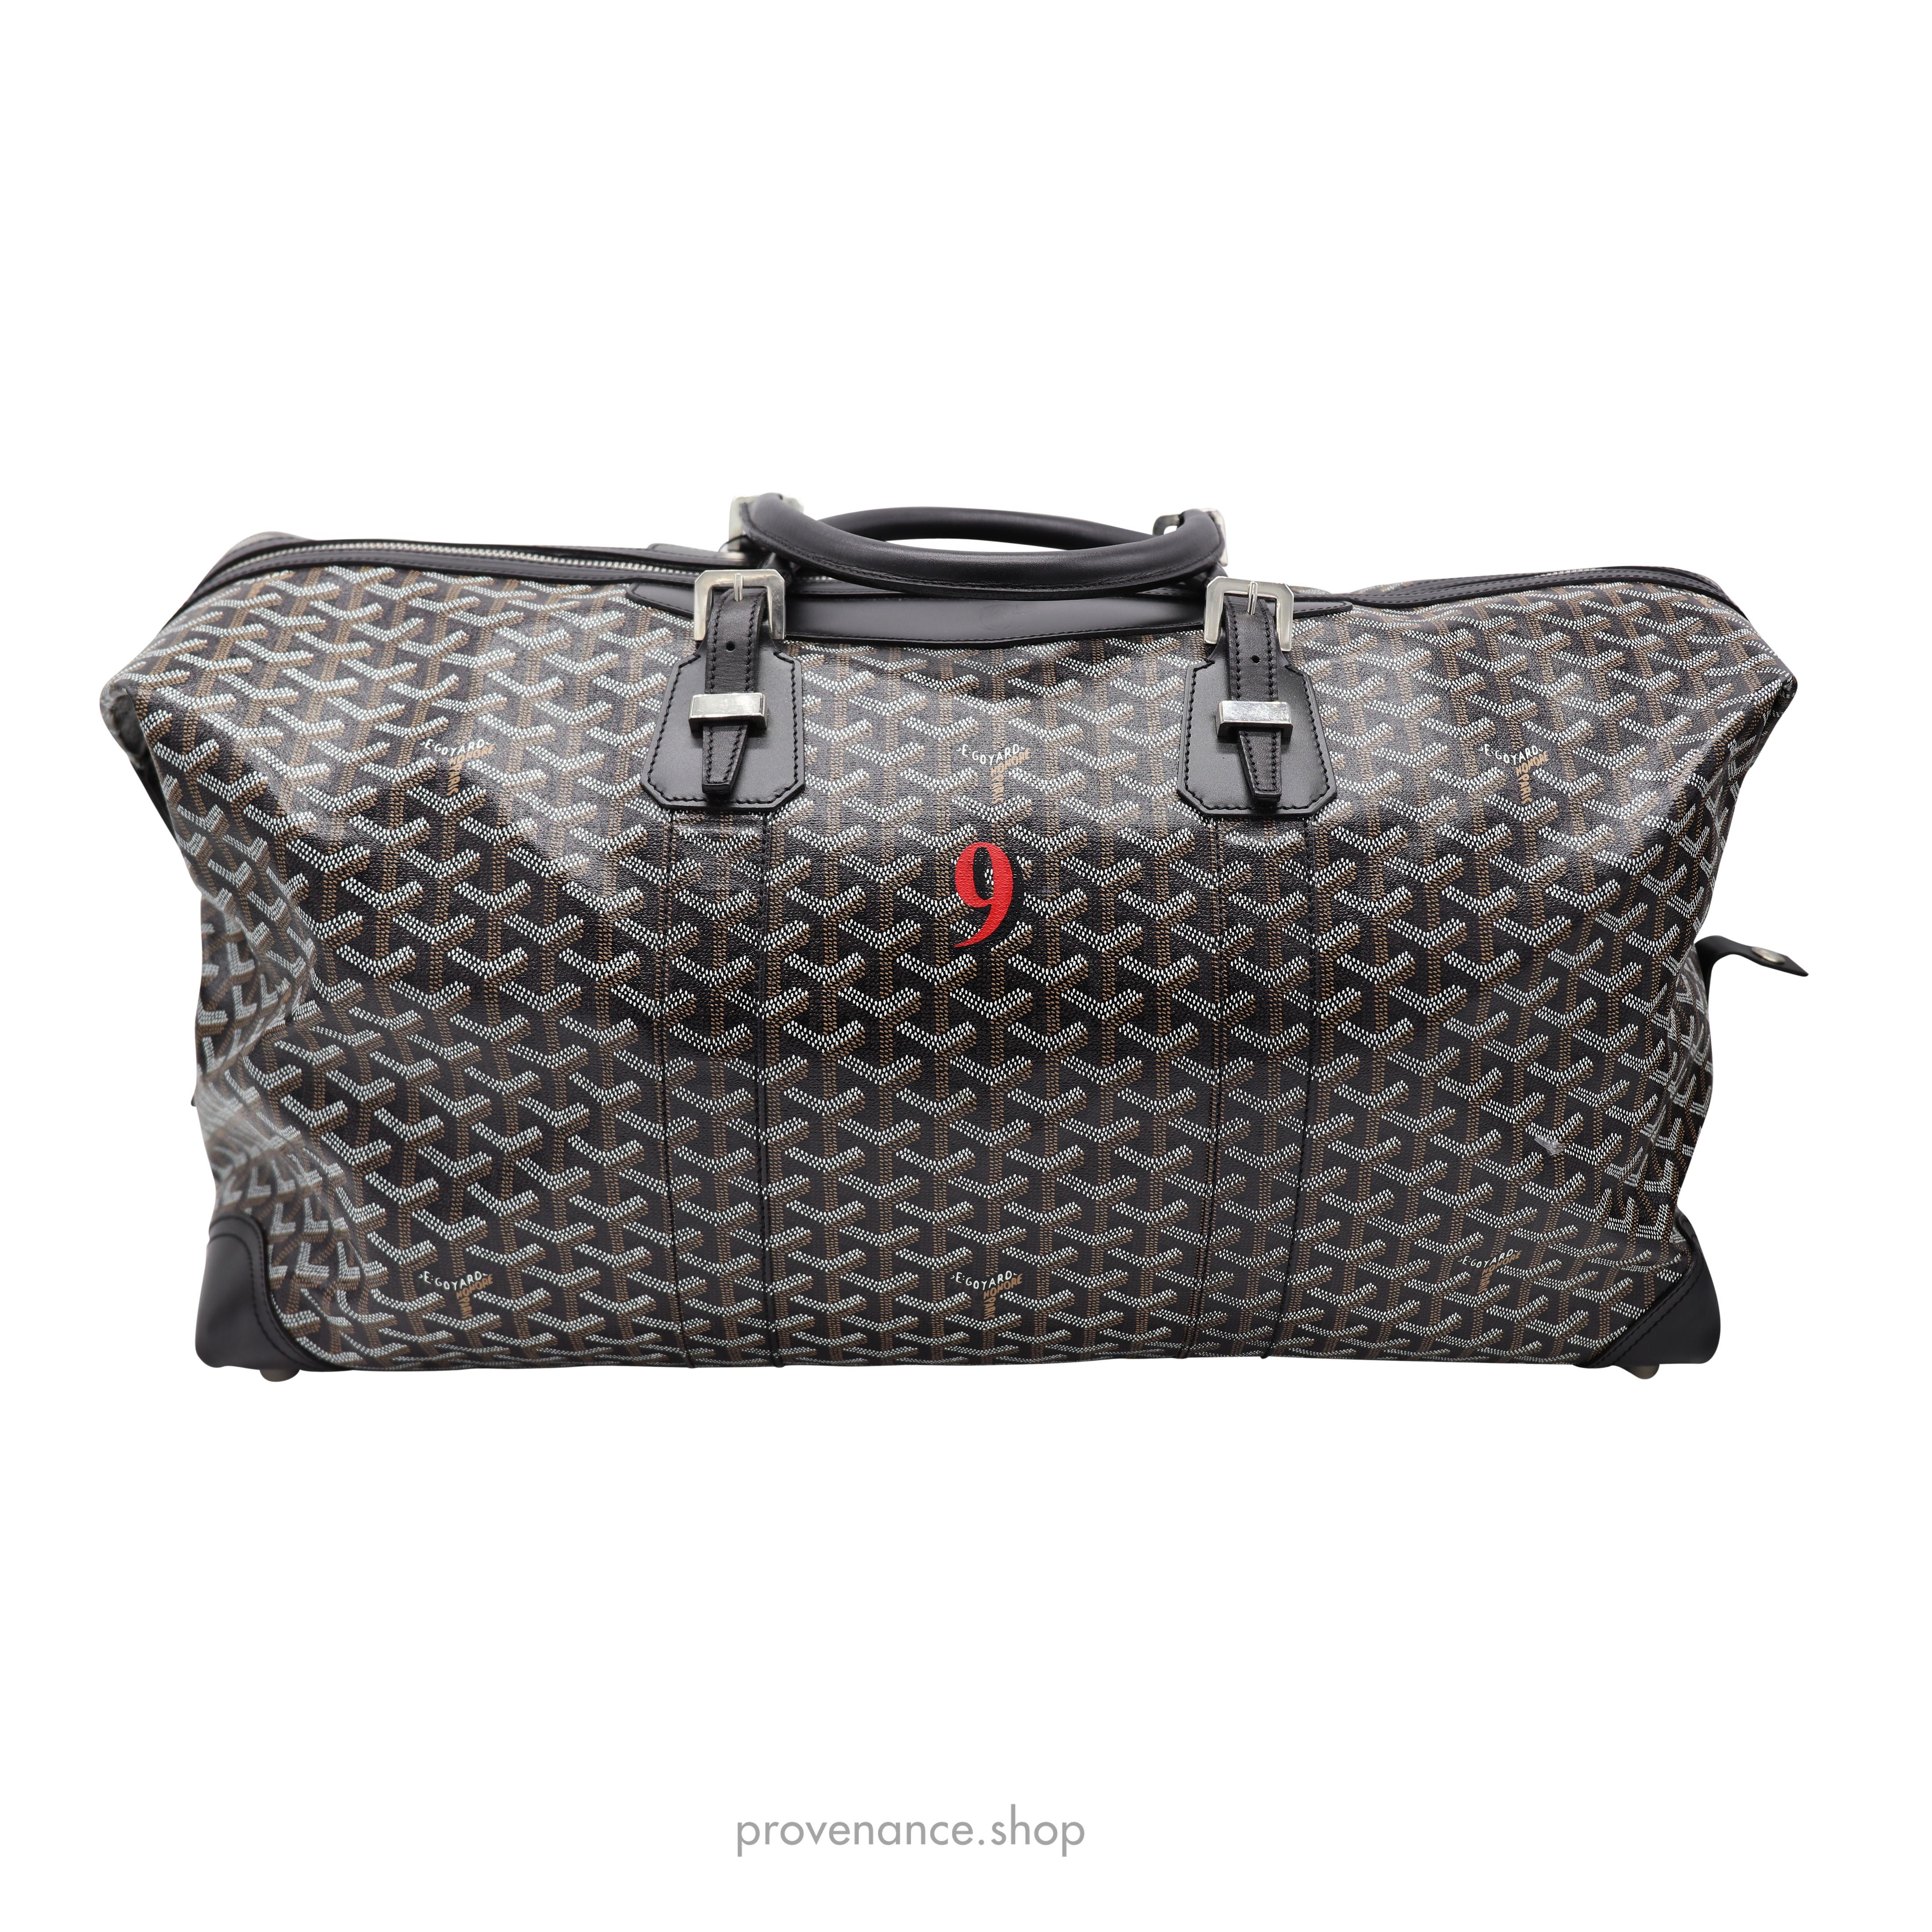 Goyard Boeing 55 Bag - Black Goyardine

100% Authentic - Money-Back Guarantee

BRAND NEW WITH TAGS- SOLD OUT IN STORES

RARE CROWN DETAIL PIECE - LIMITED TO NOBILITY

ORIGINAL LOCK/KEY, PAPERS, RETAIL DUST BAG INCLUDED

Condition Notes:
New, Unused